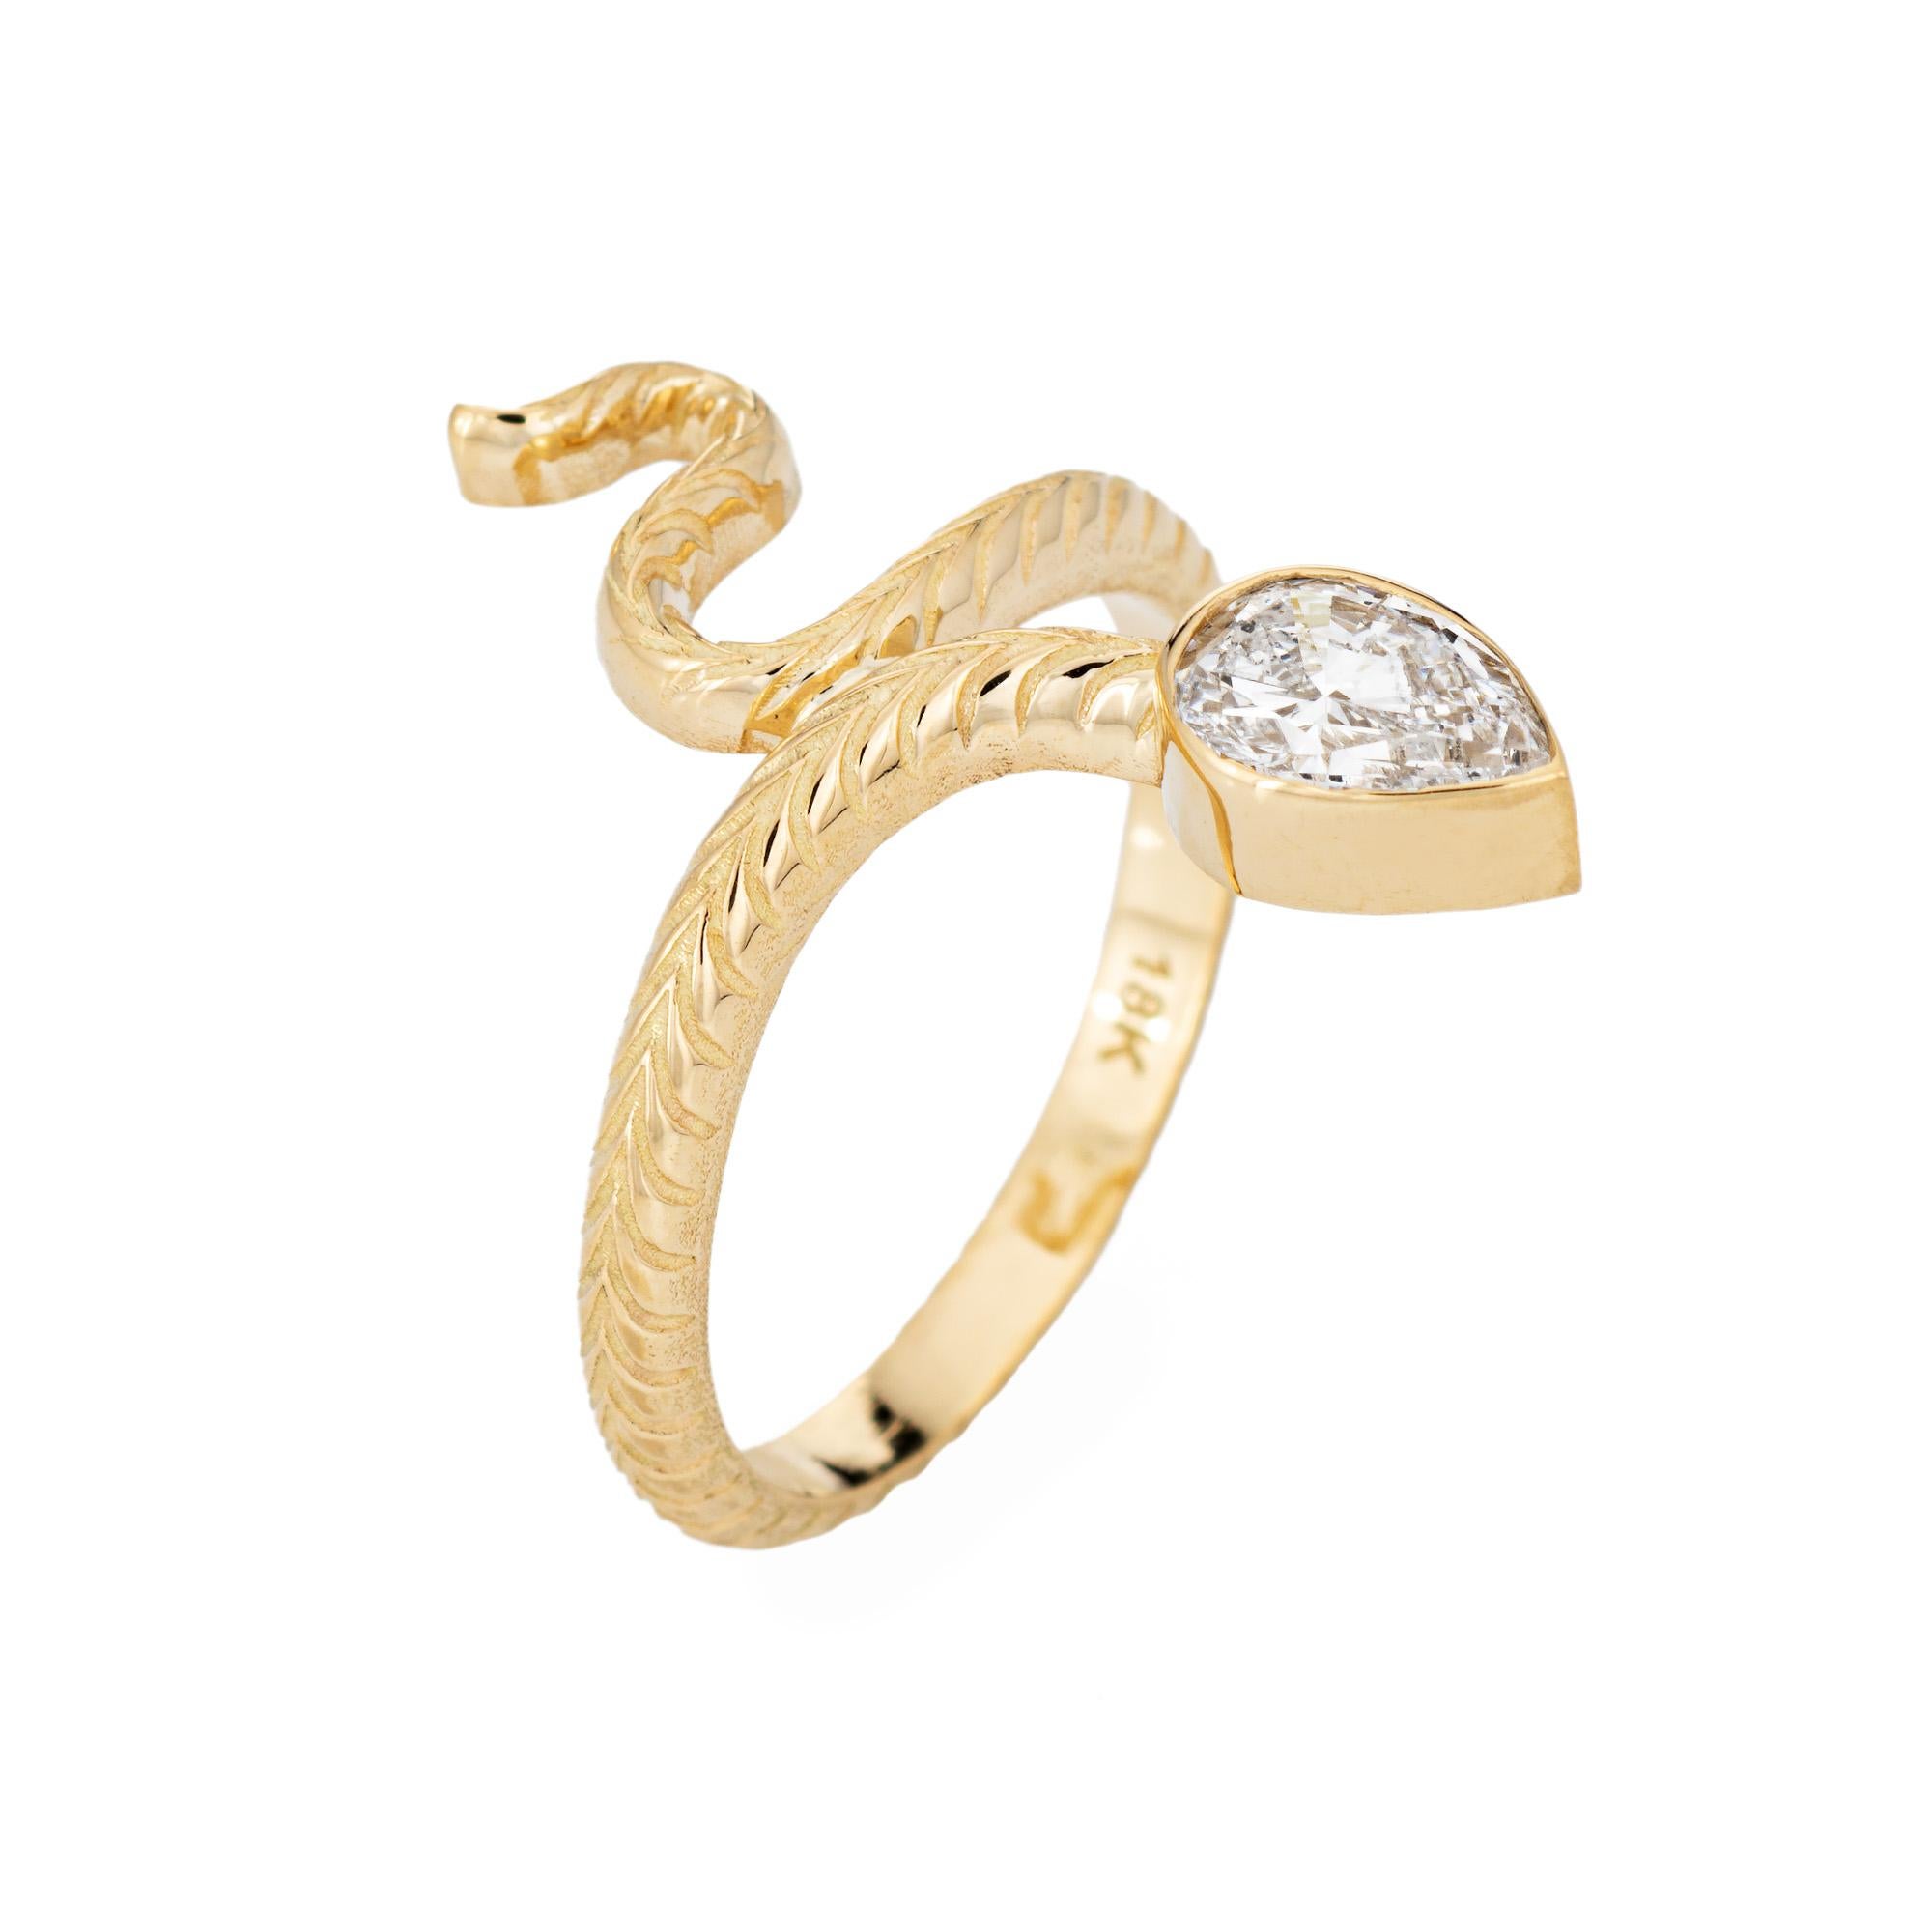 Stylish diamond snake ring crafted in 18 karat yellow gold. 

Pear brilliant diamond measures 6.90 x 4.89 x 2.94mm and weighs 0.58 carats. The diamond is graded D color and SI2 clarity. Also included is a GIA report/certificate.    

For centuries